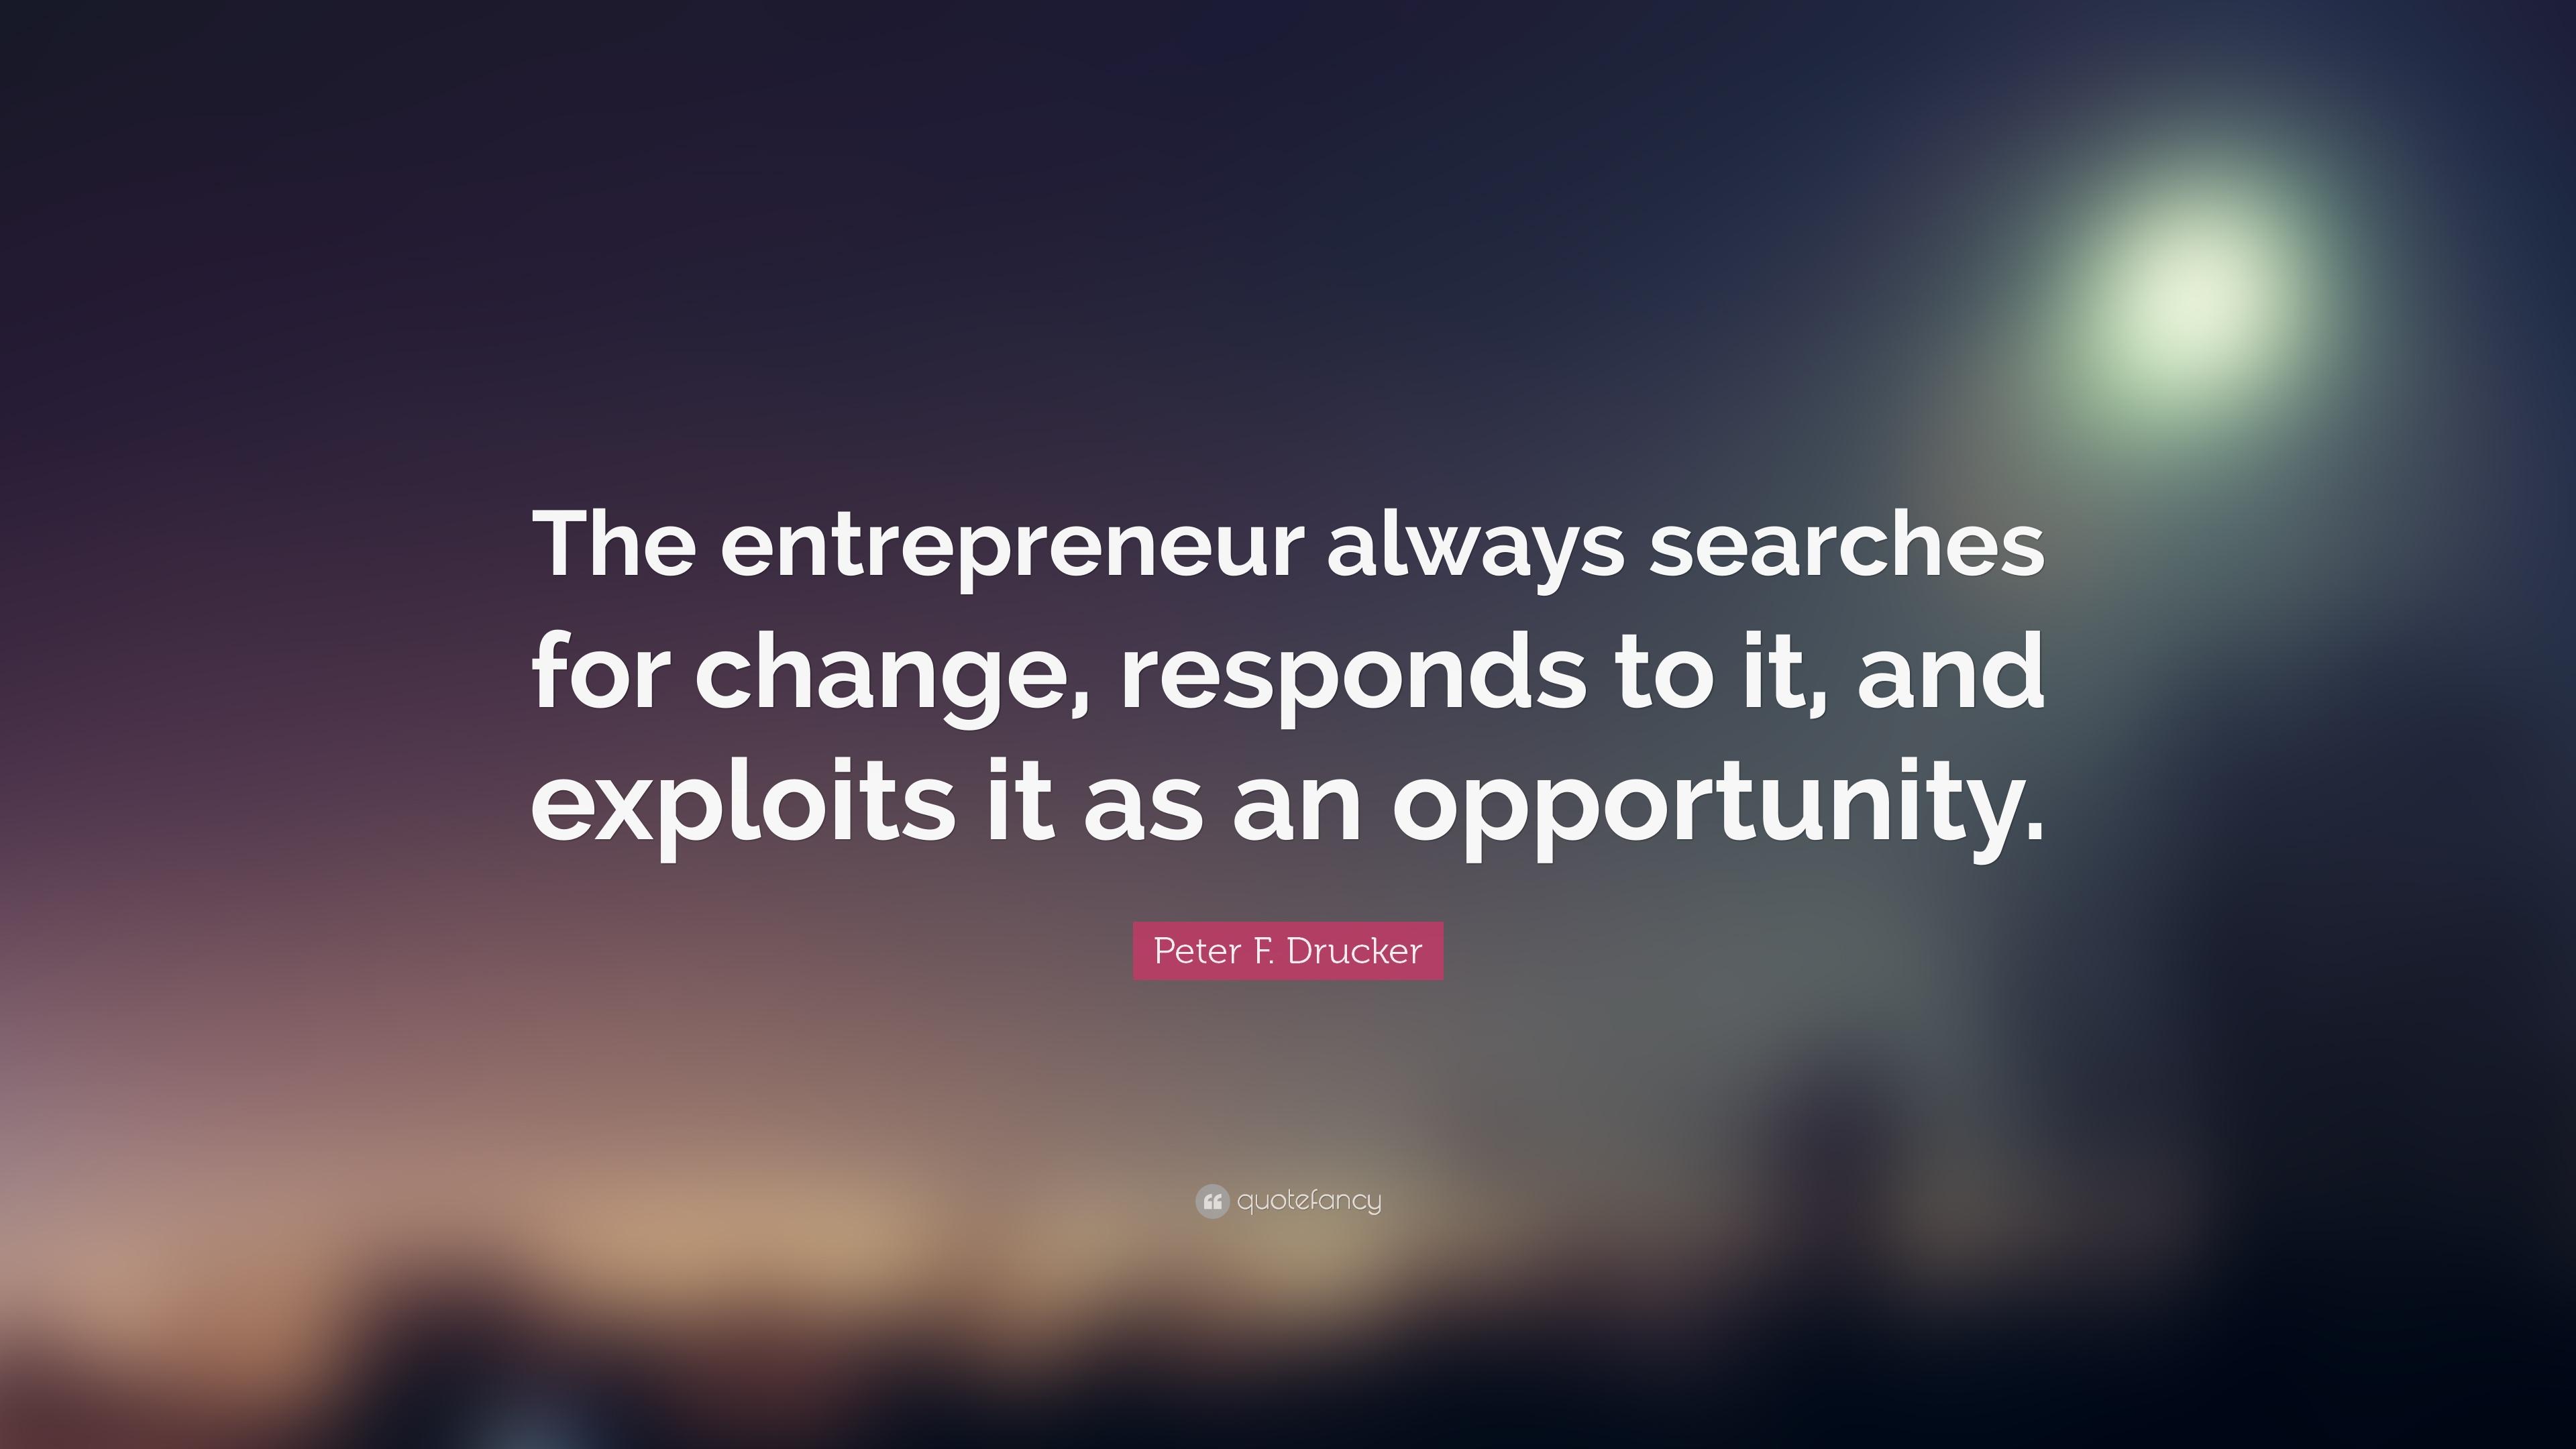 Peter F. Drucker Quote: “The entrepreneur always searches